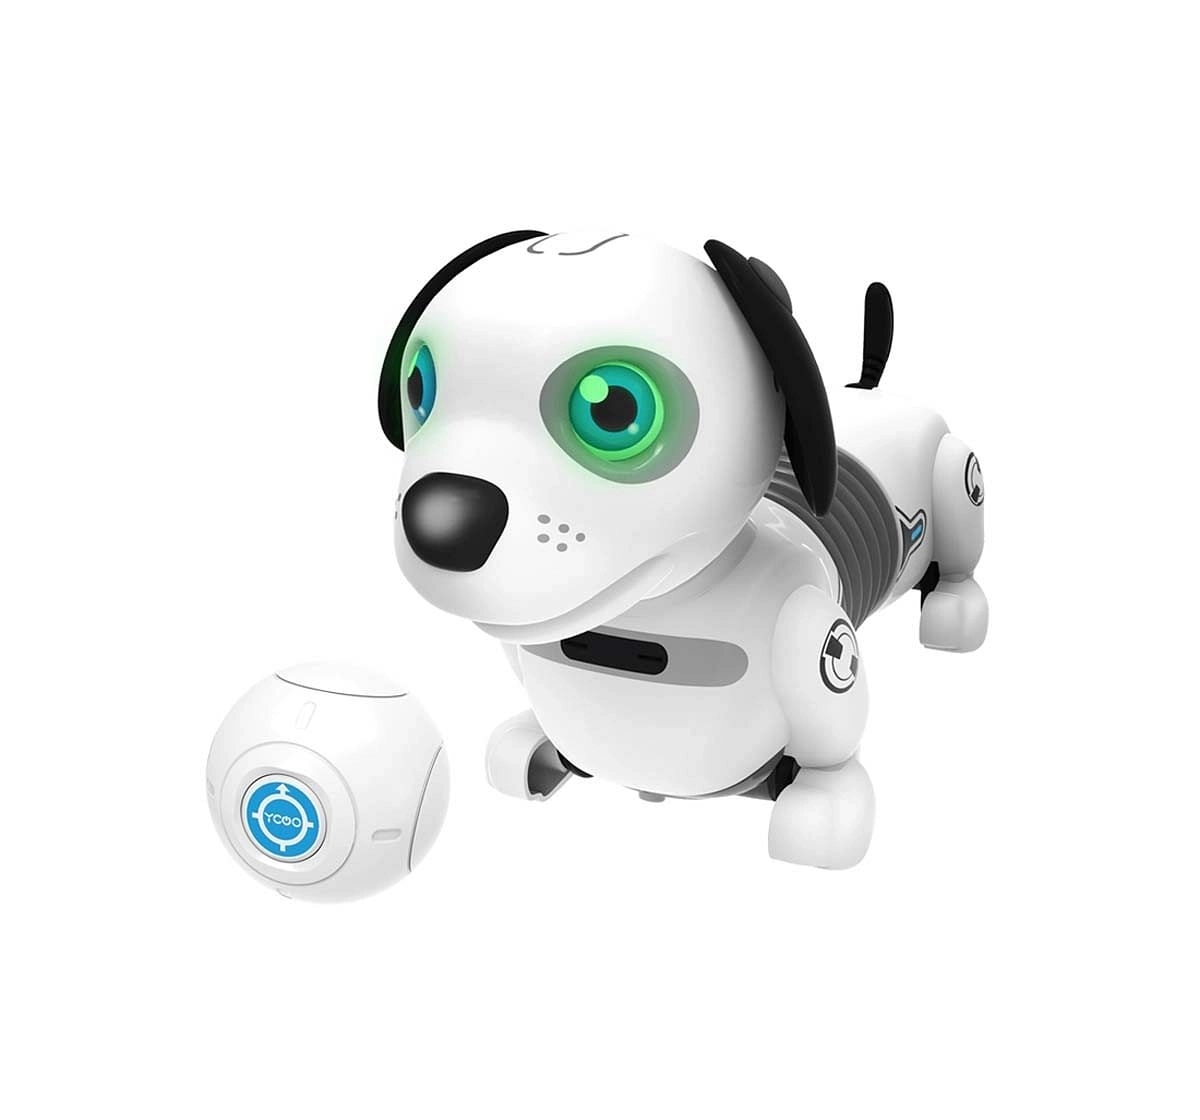 Silverlit Ycoo Robo Dackel Jr Ls An Interactive Robotic Puppy With Gesture Control Remote Included for Kids Age 5Y+ (White)